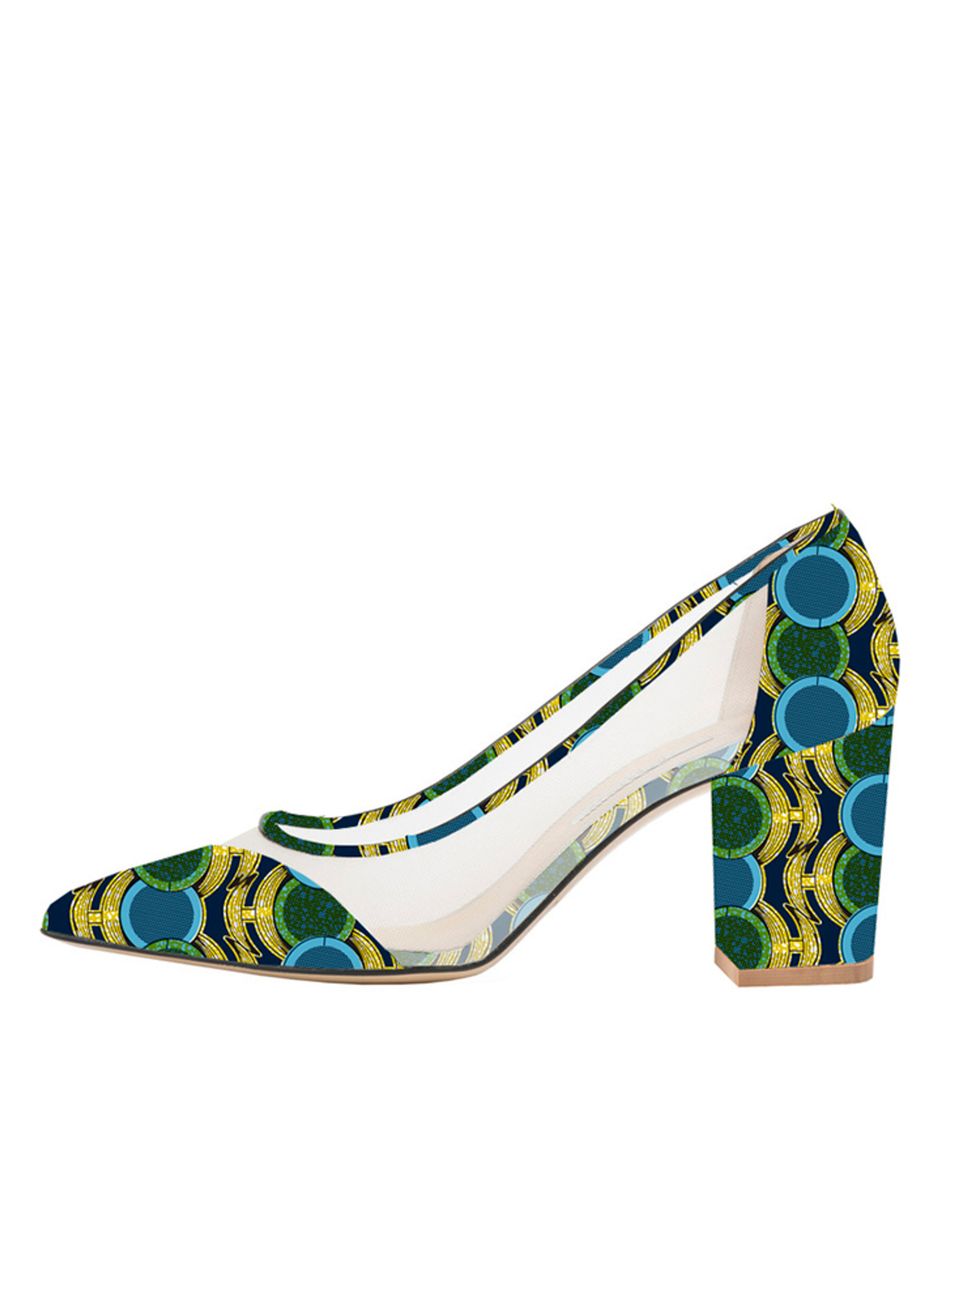 <p>Bionda Castana for M2M <a href="http://biondacastana.com/collections/shoes/products/juliet-mothers2mothers-africa-art-deco-single-sole-mid-heel-75mm-heel-1" target="_blank">'Juliet' shoes</a>, £395</p>